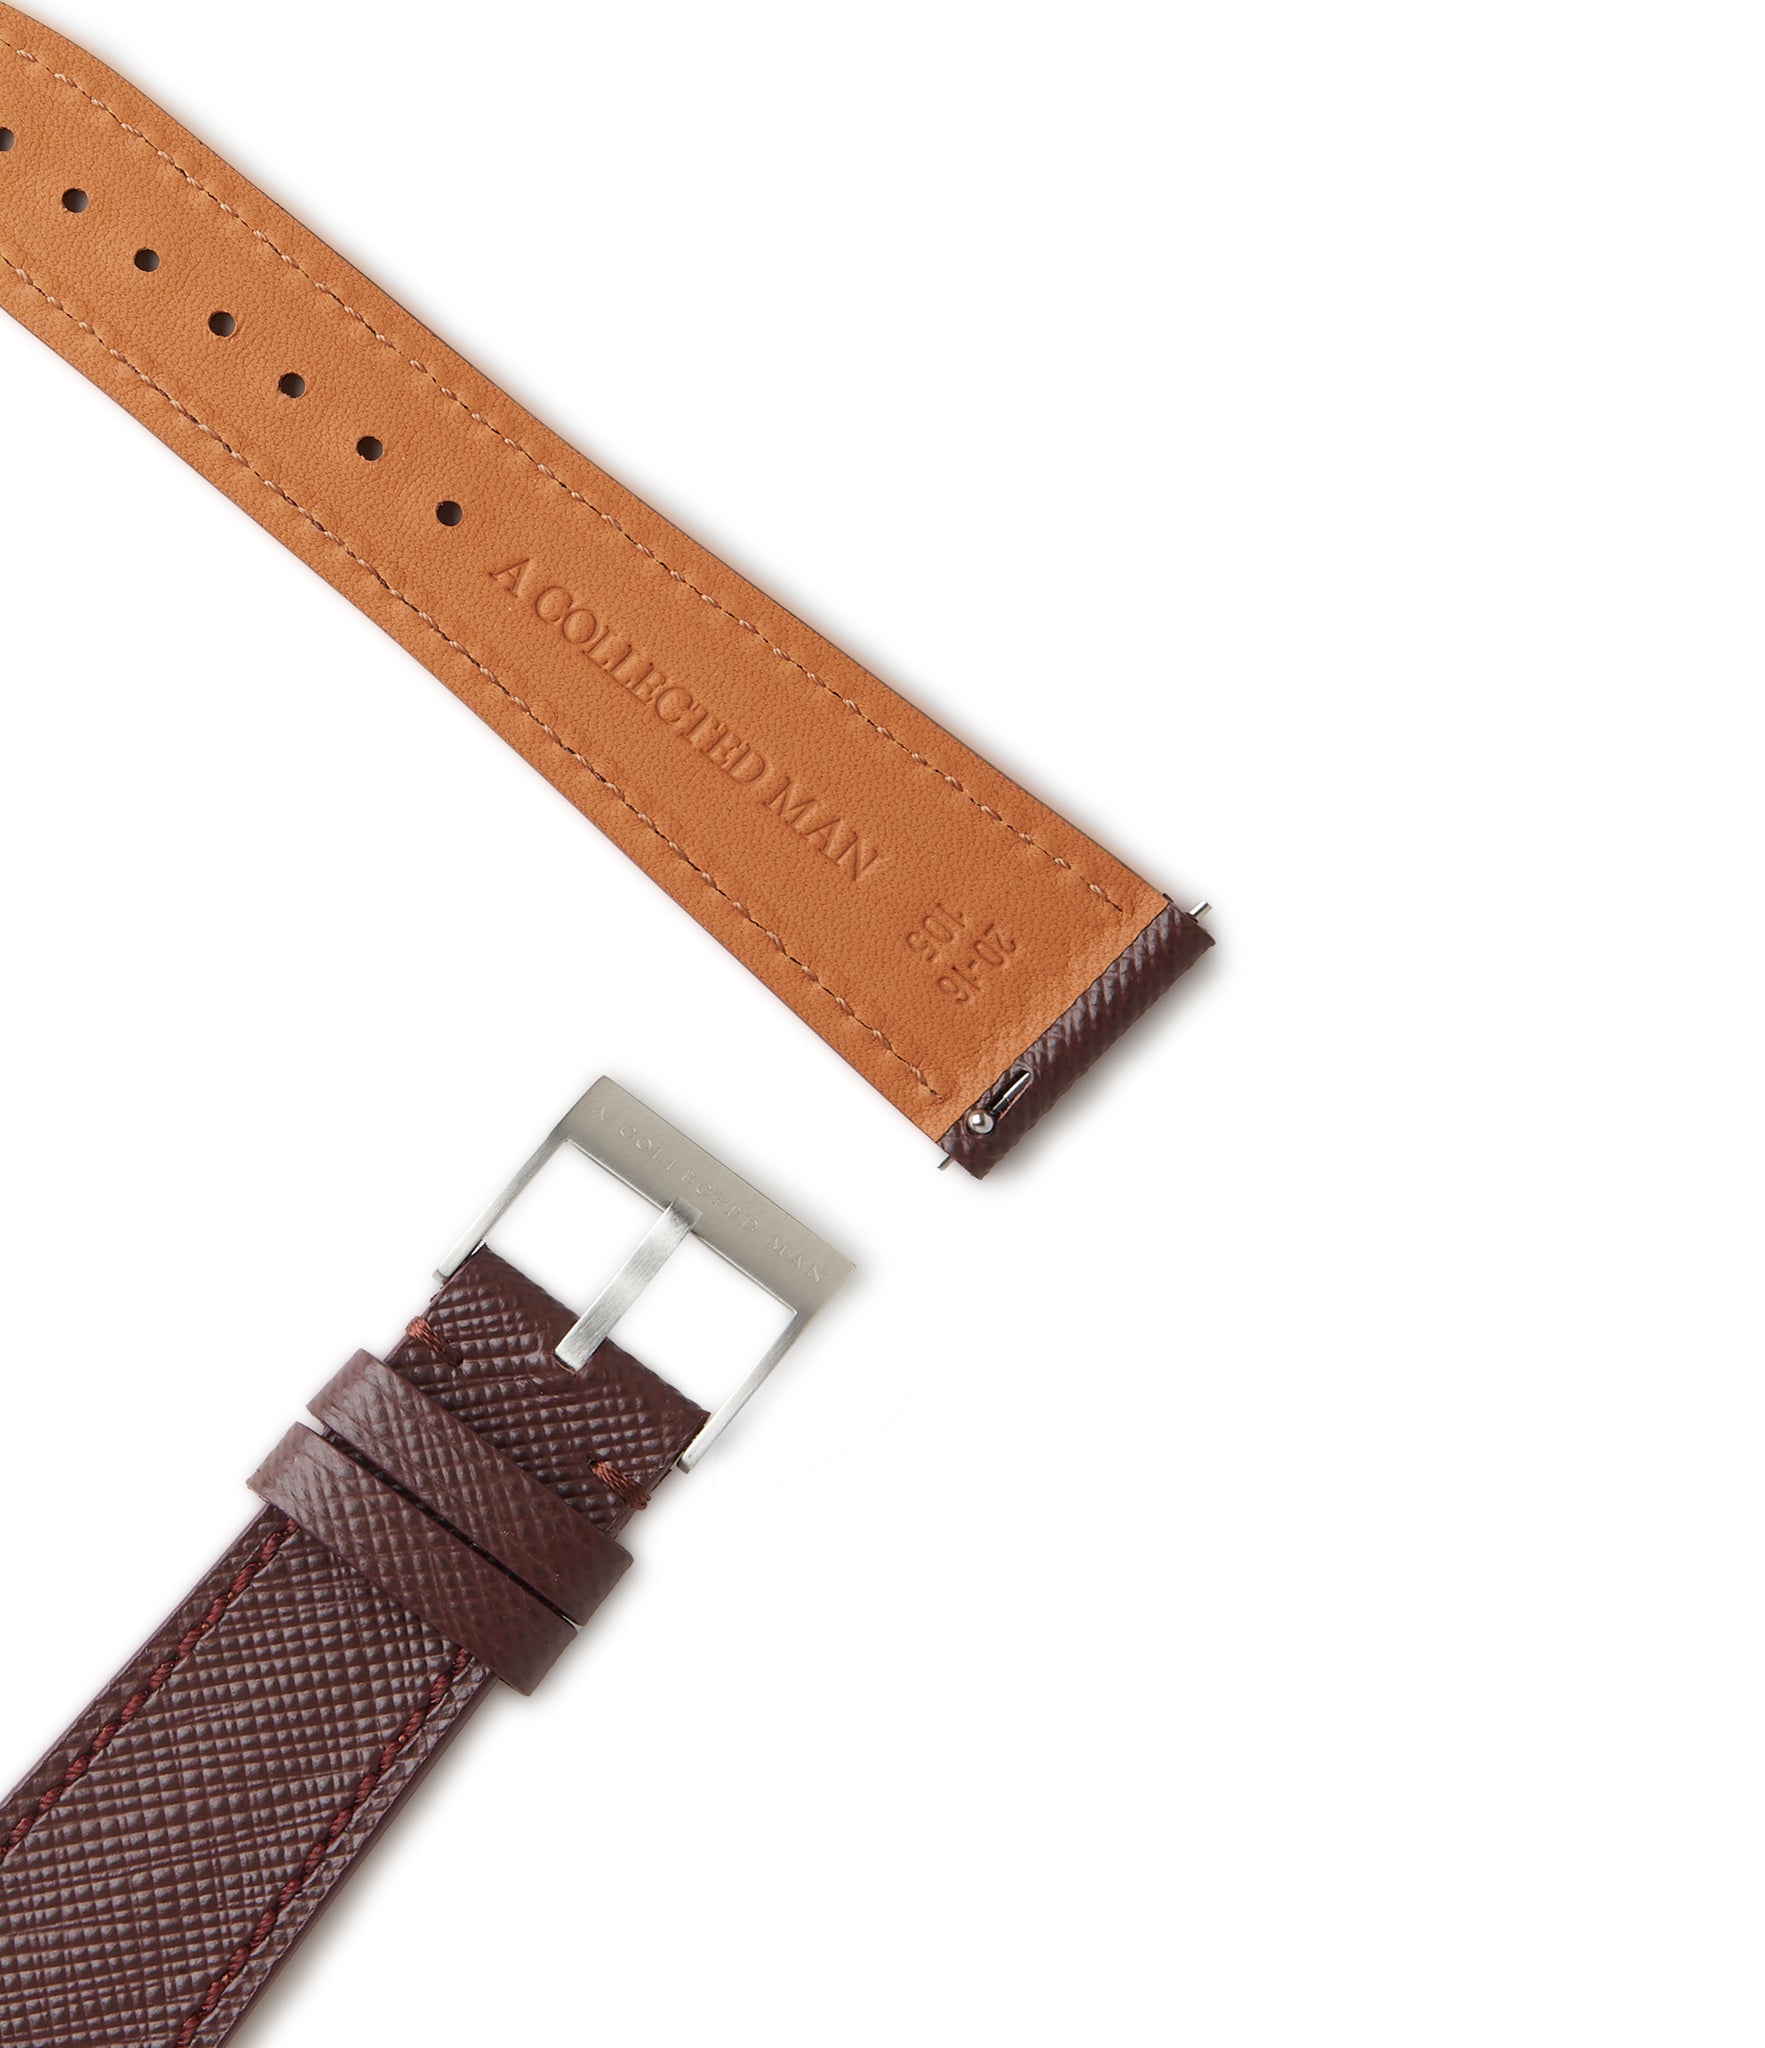 Buy saffiano quality watch strap in dark maroon burgundy from A Collected Man London, in short or regular lengths. We are proud to offer these hand-crafted watch straps, thoughtfully made in Europe, to suit your watch. Available to order online for worldwide delivery.